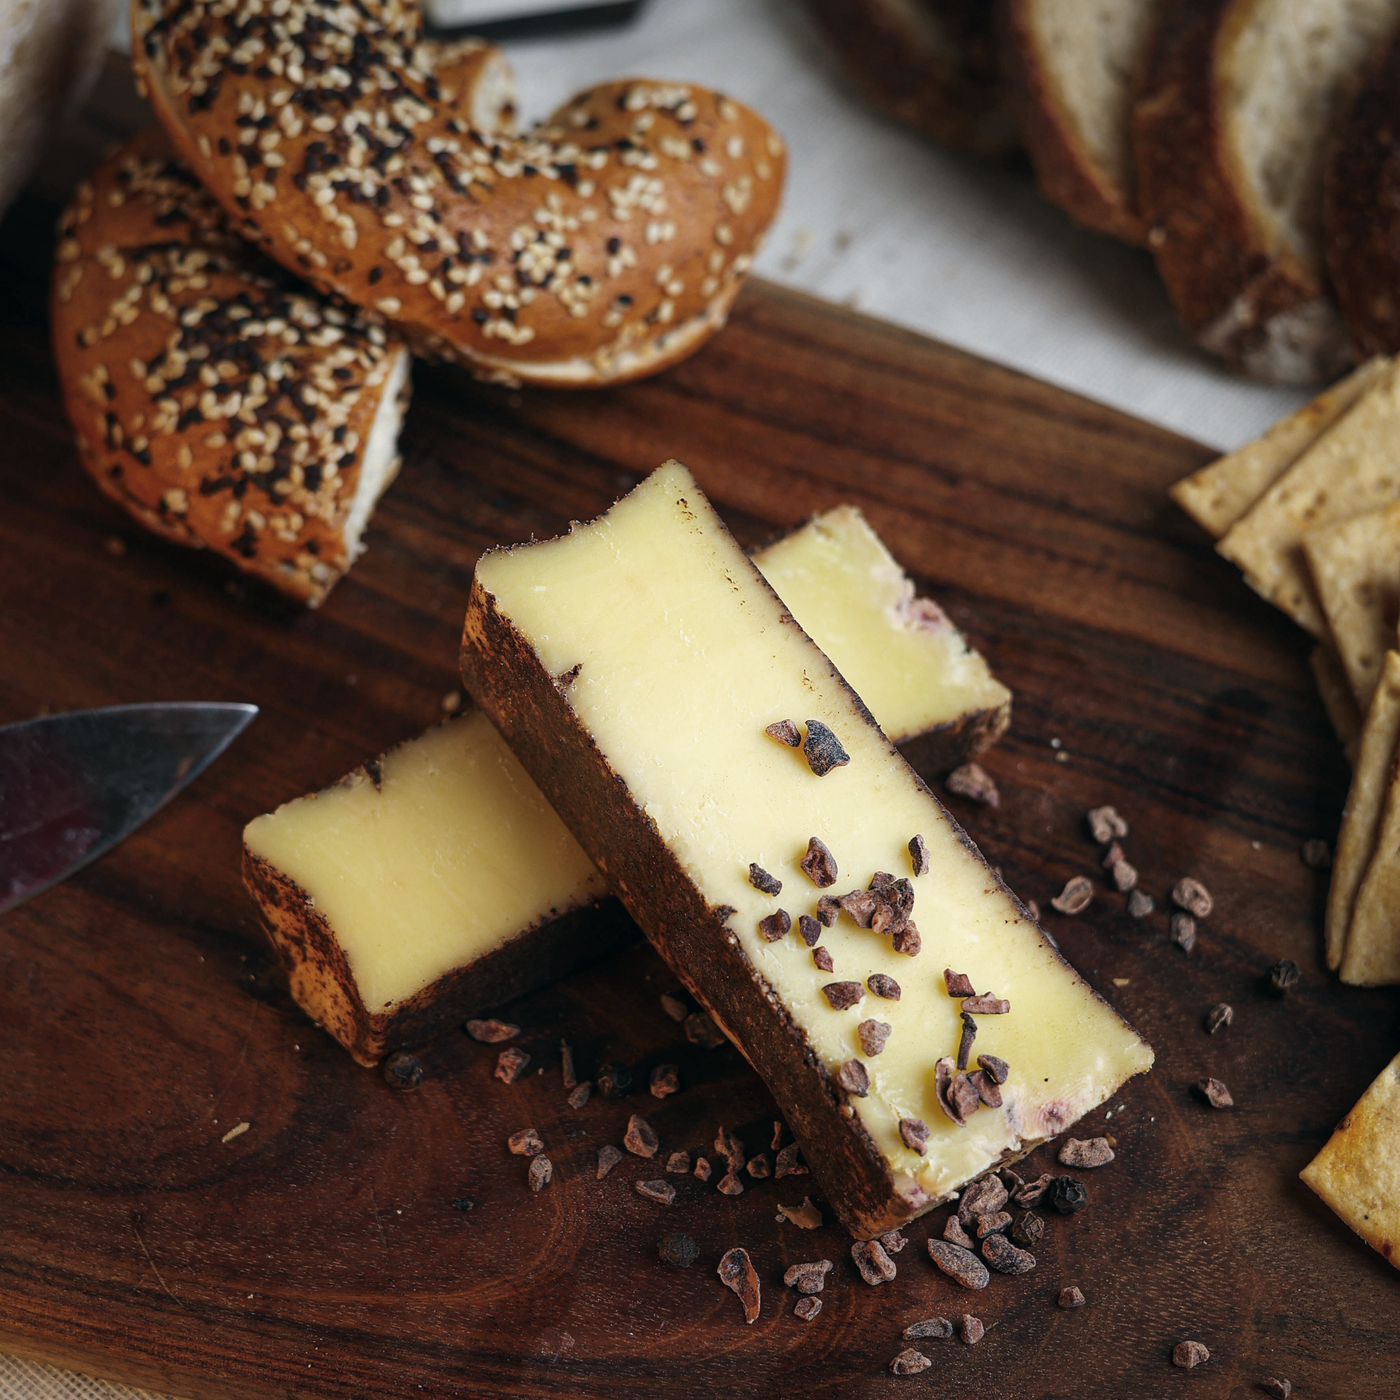 Käse Blackjack is a young semi-hard cheese aged for about 3 months, crusted with a mixture of coffee beans, cacao nibs & peppercorns and aged for another 2-3 weeks.